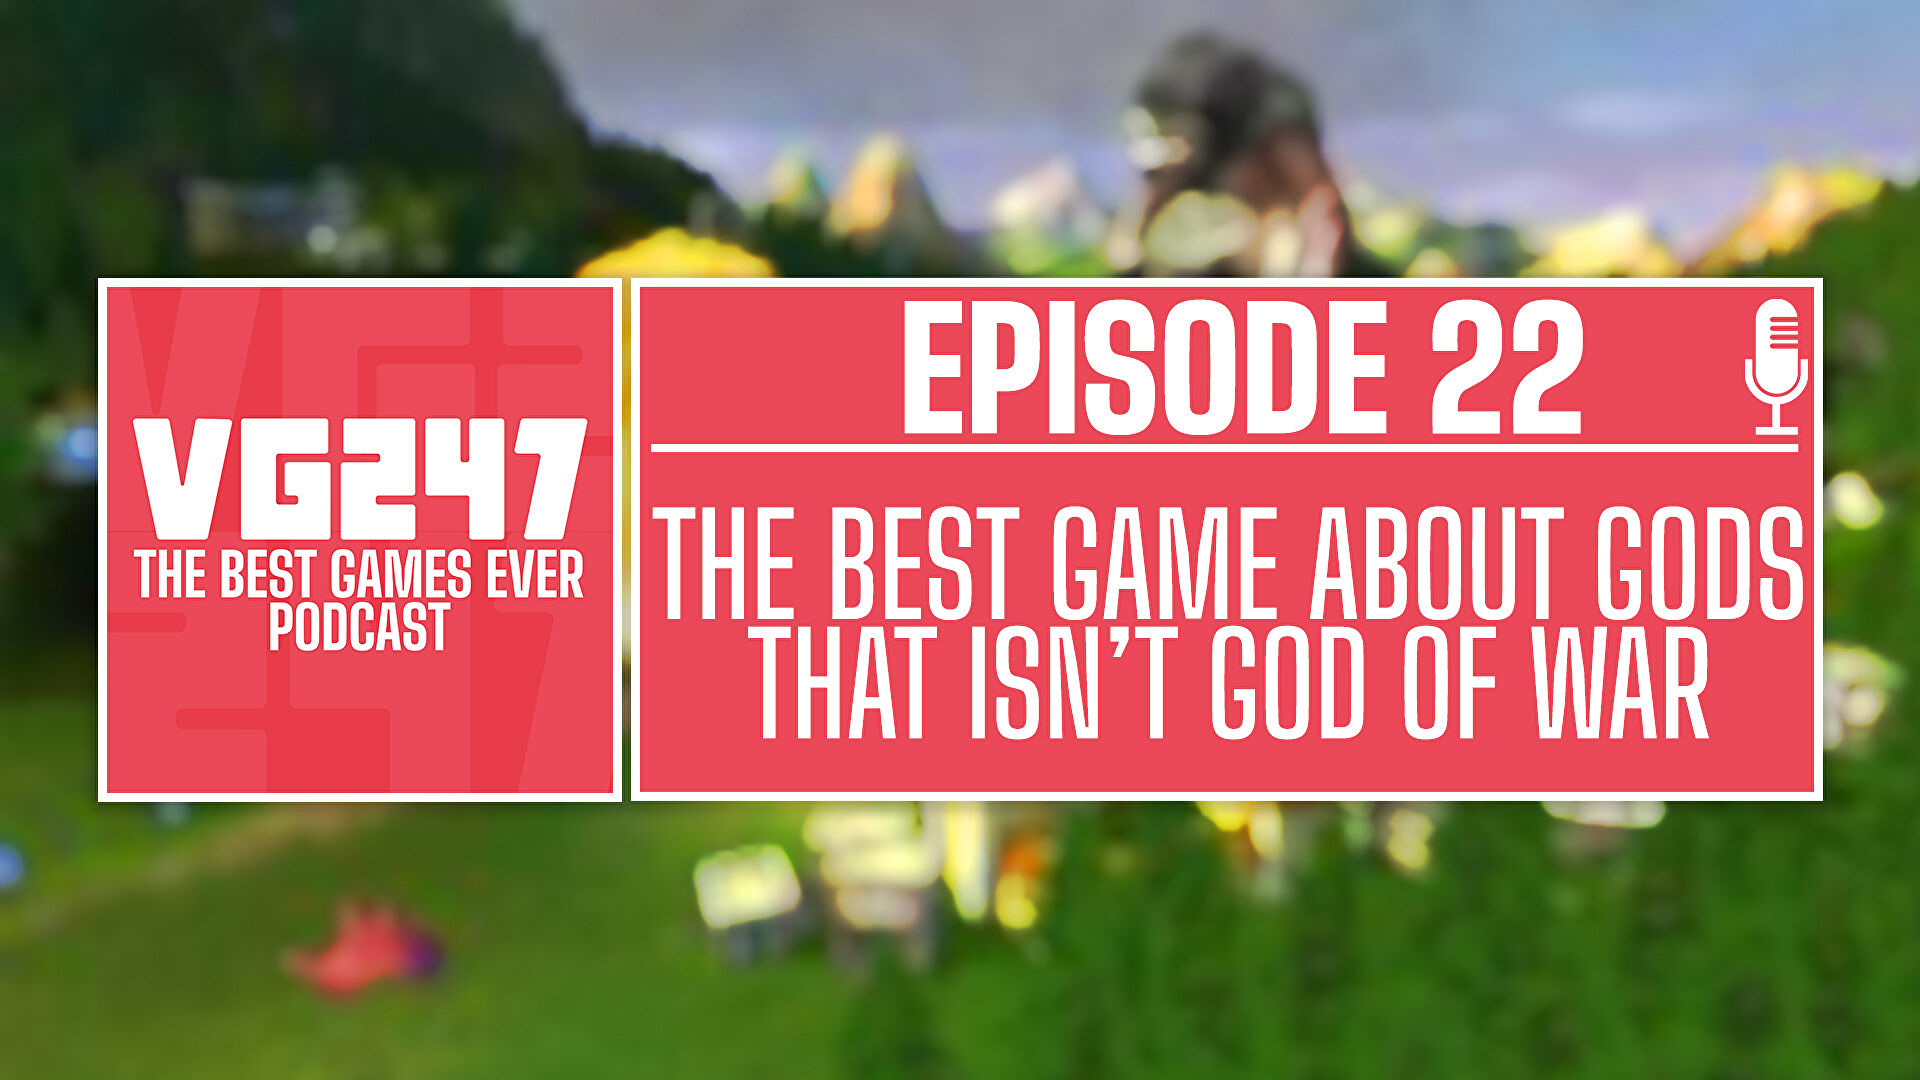 VG247’s The Best Games Ever Podcast – Ep.22: The best game about gods that isn’t God of War